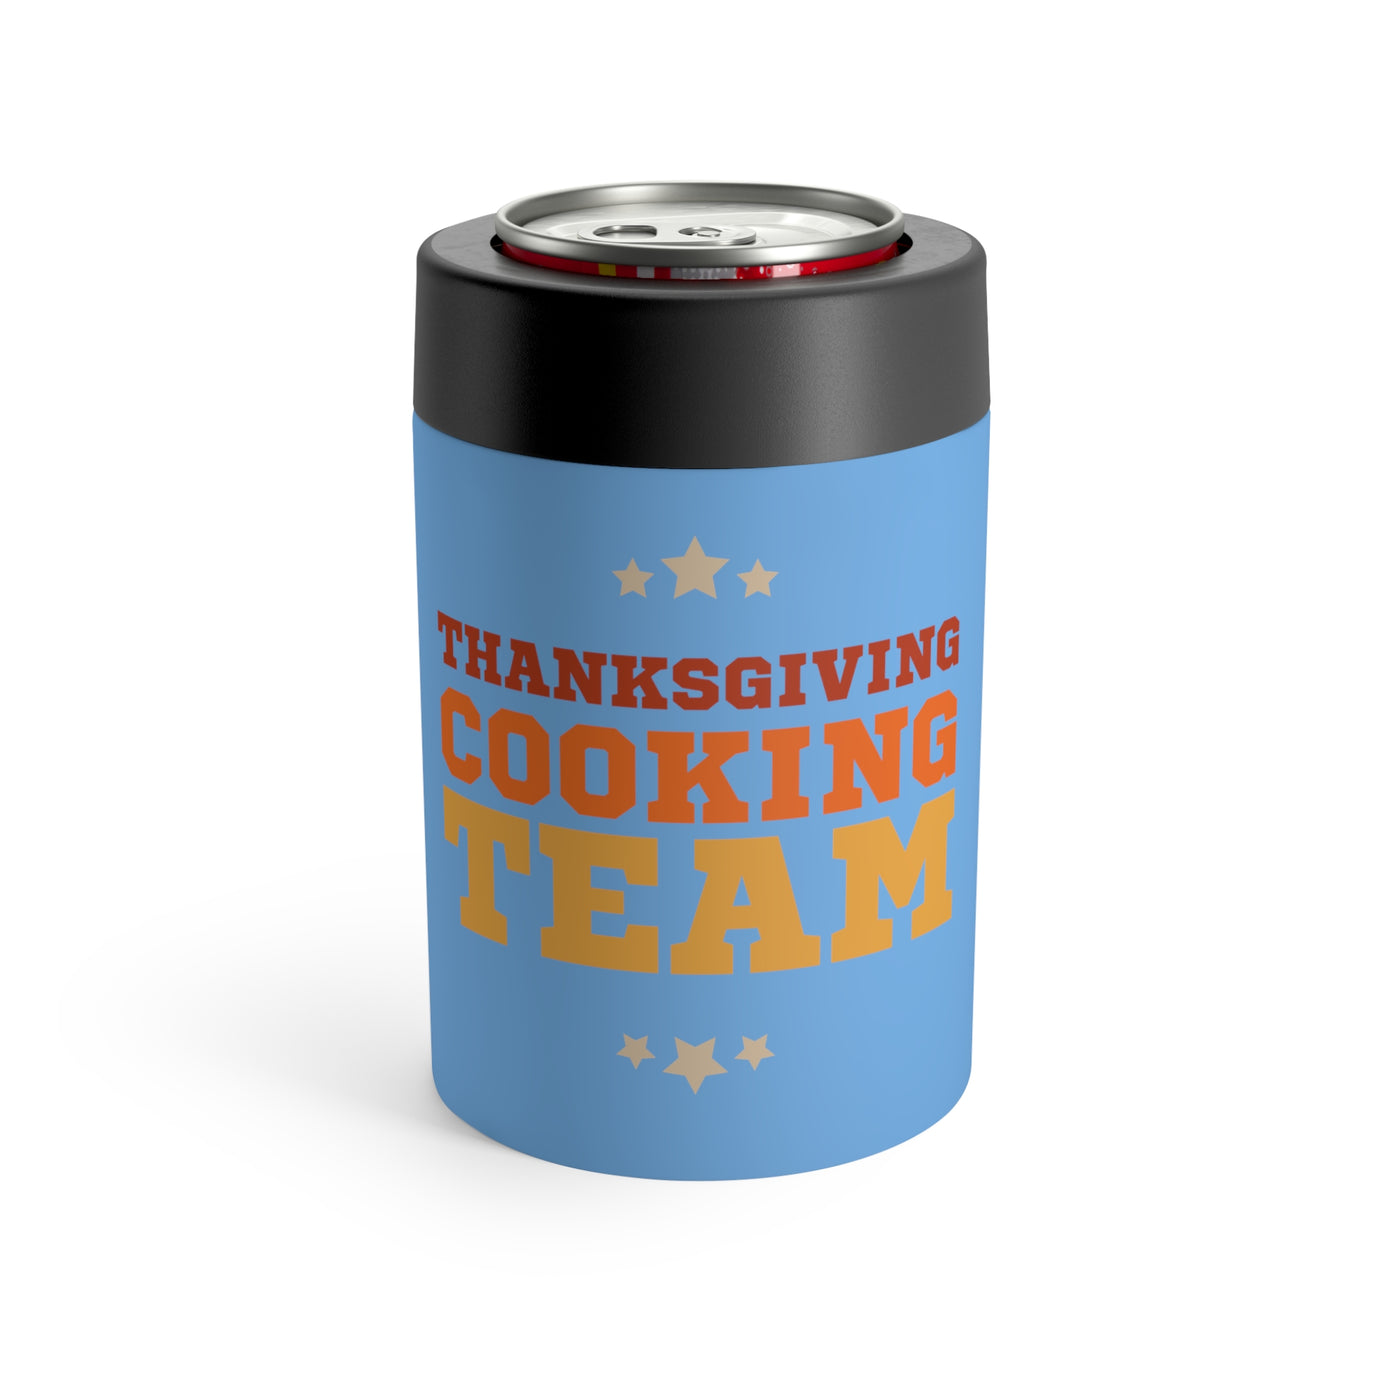 Thanksgiving Cooking Team Stainless Steel Can Holder